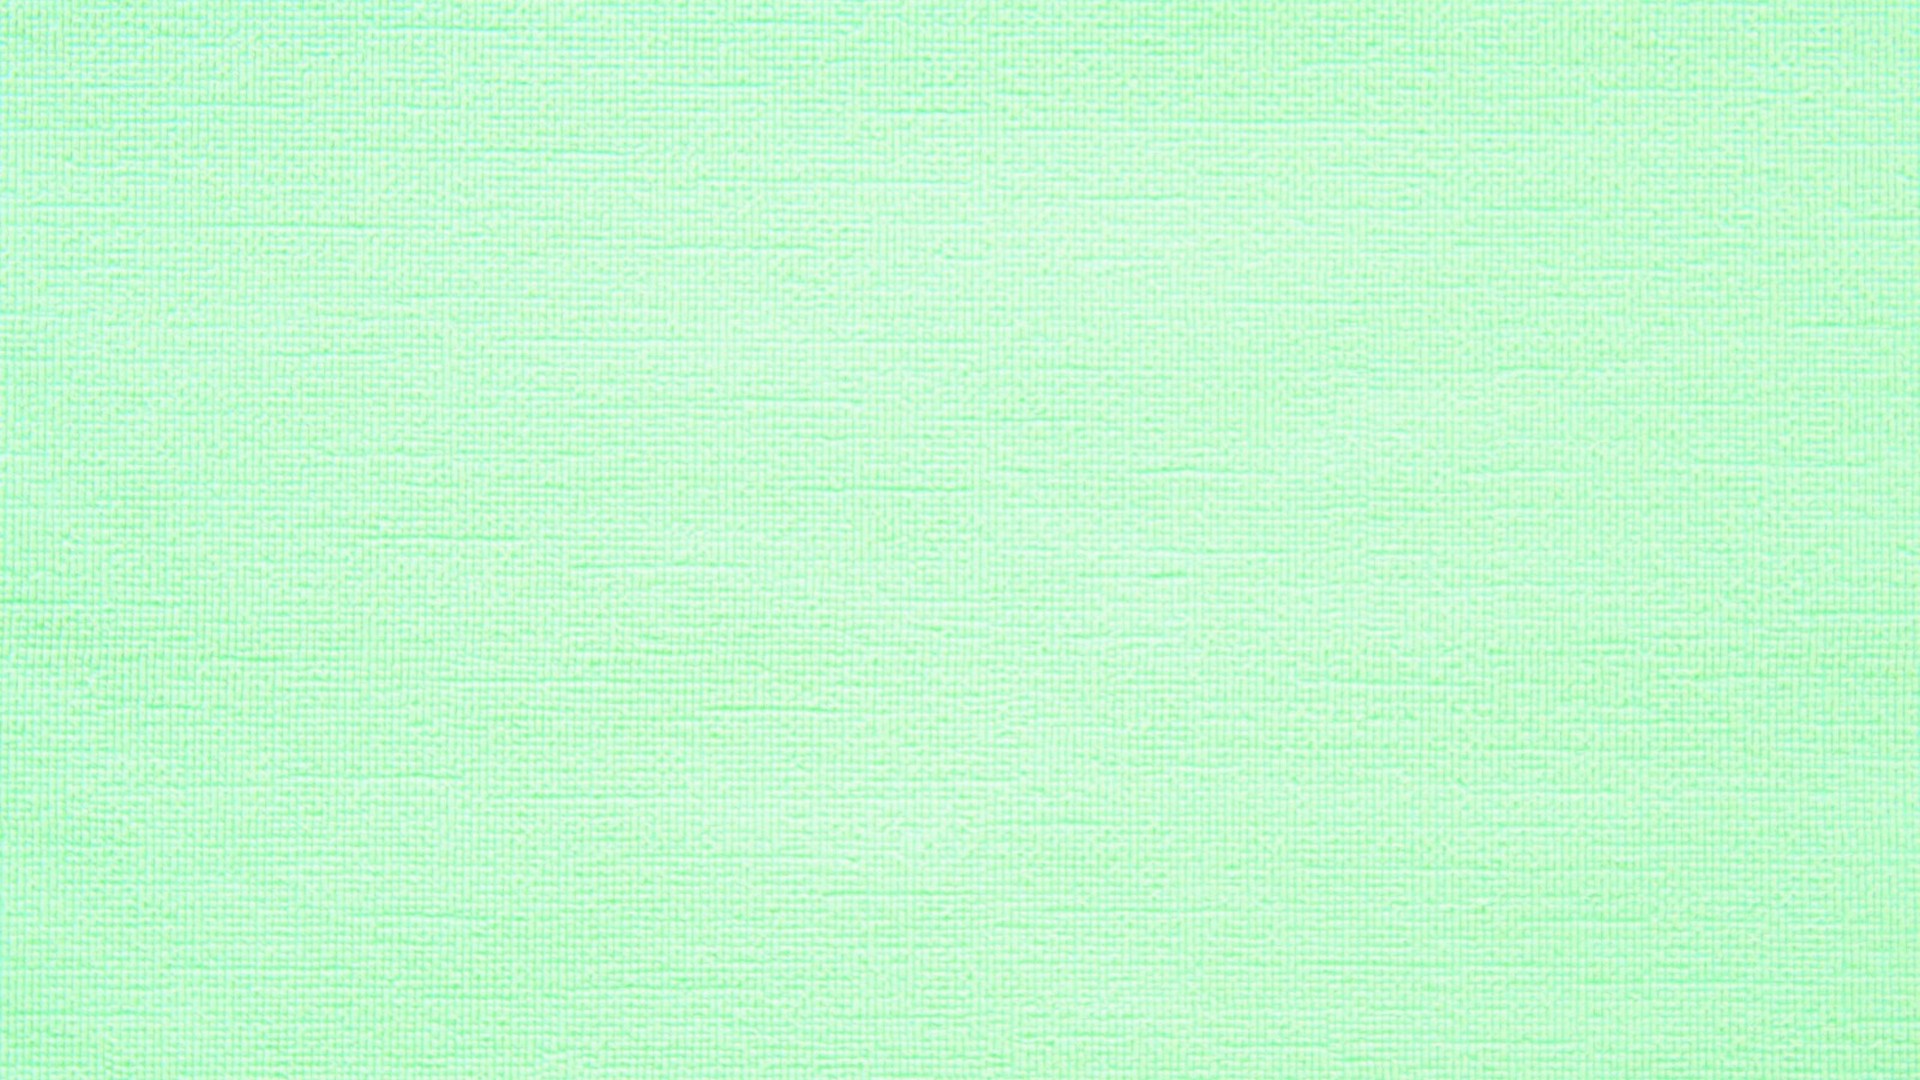 Cute Green HD Backgrounds With Resolution 1920X1080 pixel. You can make this wallpaper for your Desktop Computer Backgrounds, Mac Wallpapers, Android Lock screen or iPhone Screensavers